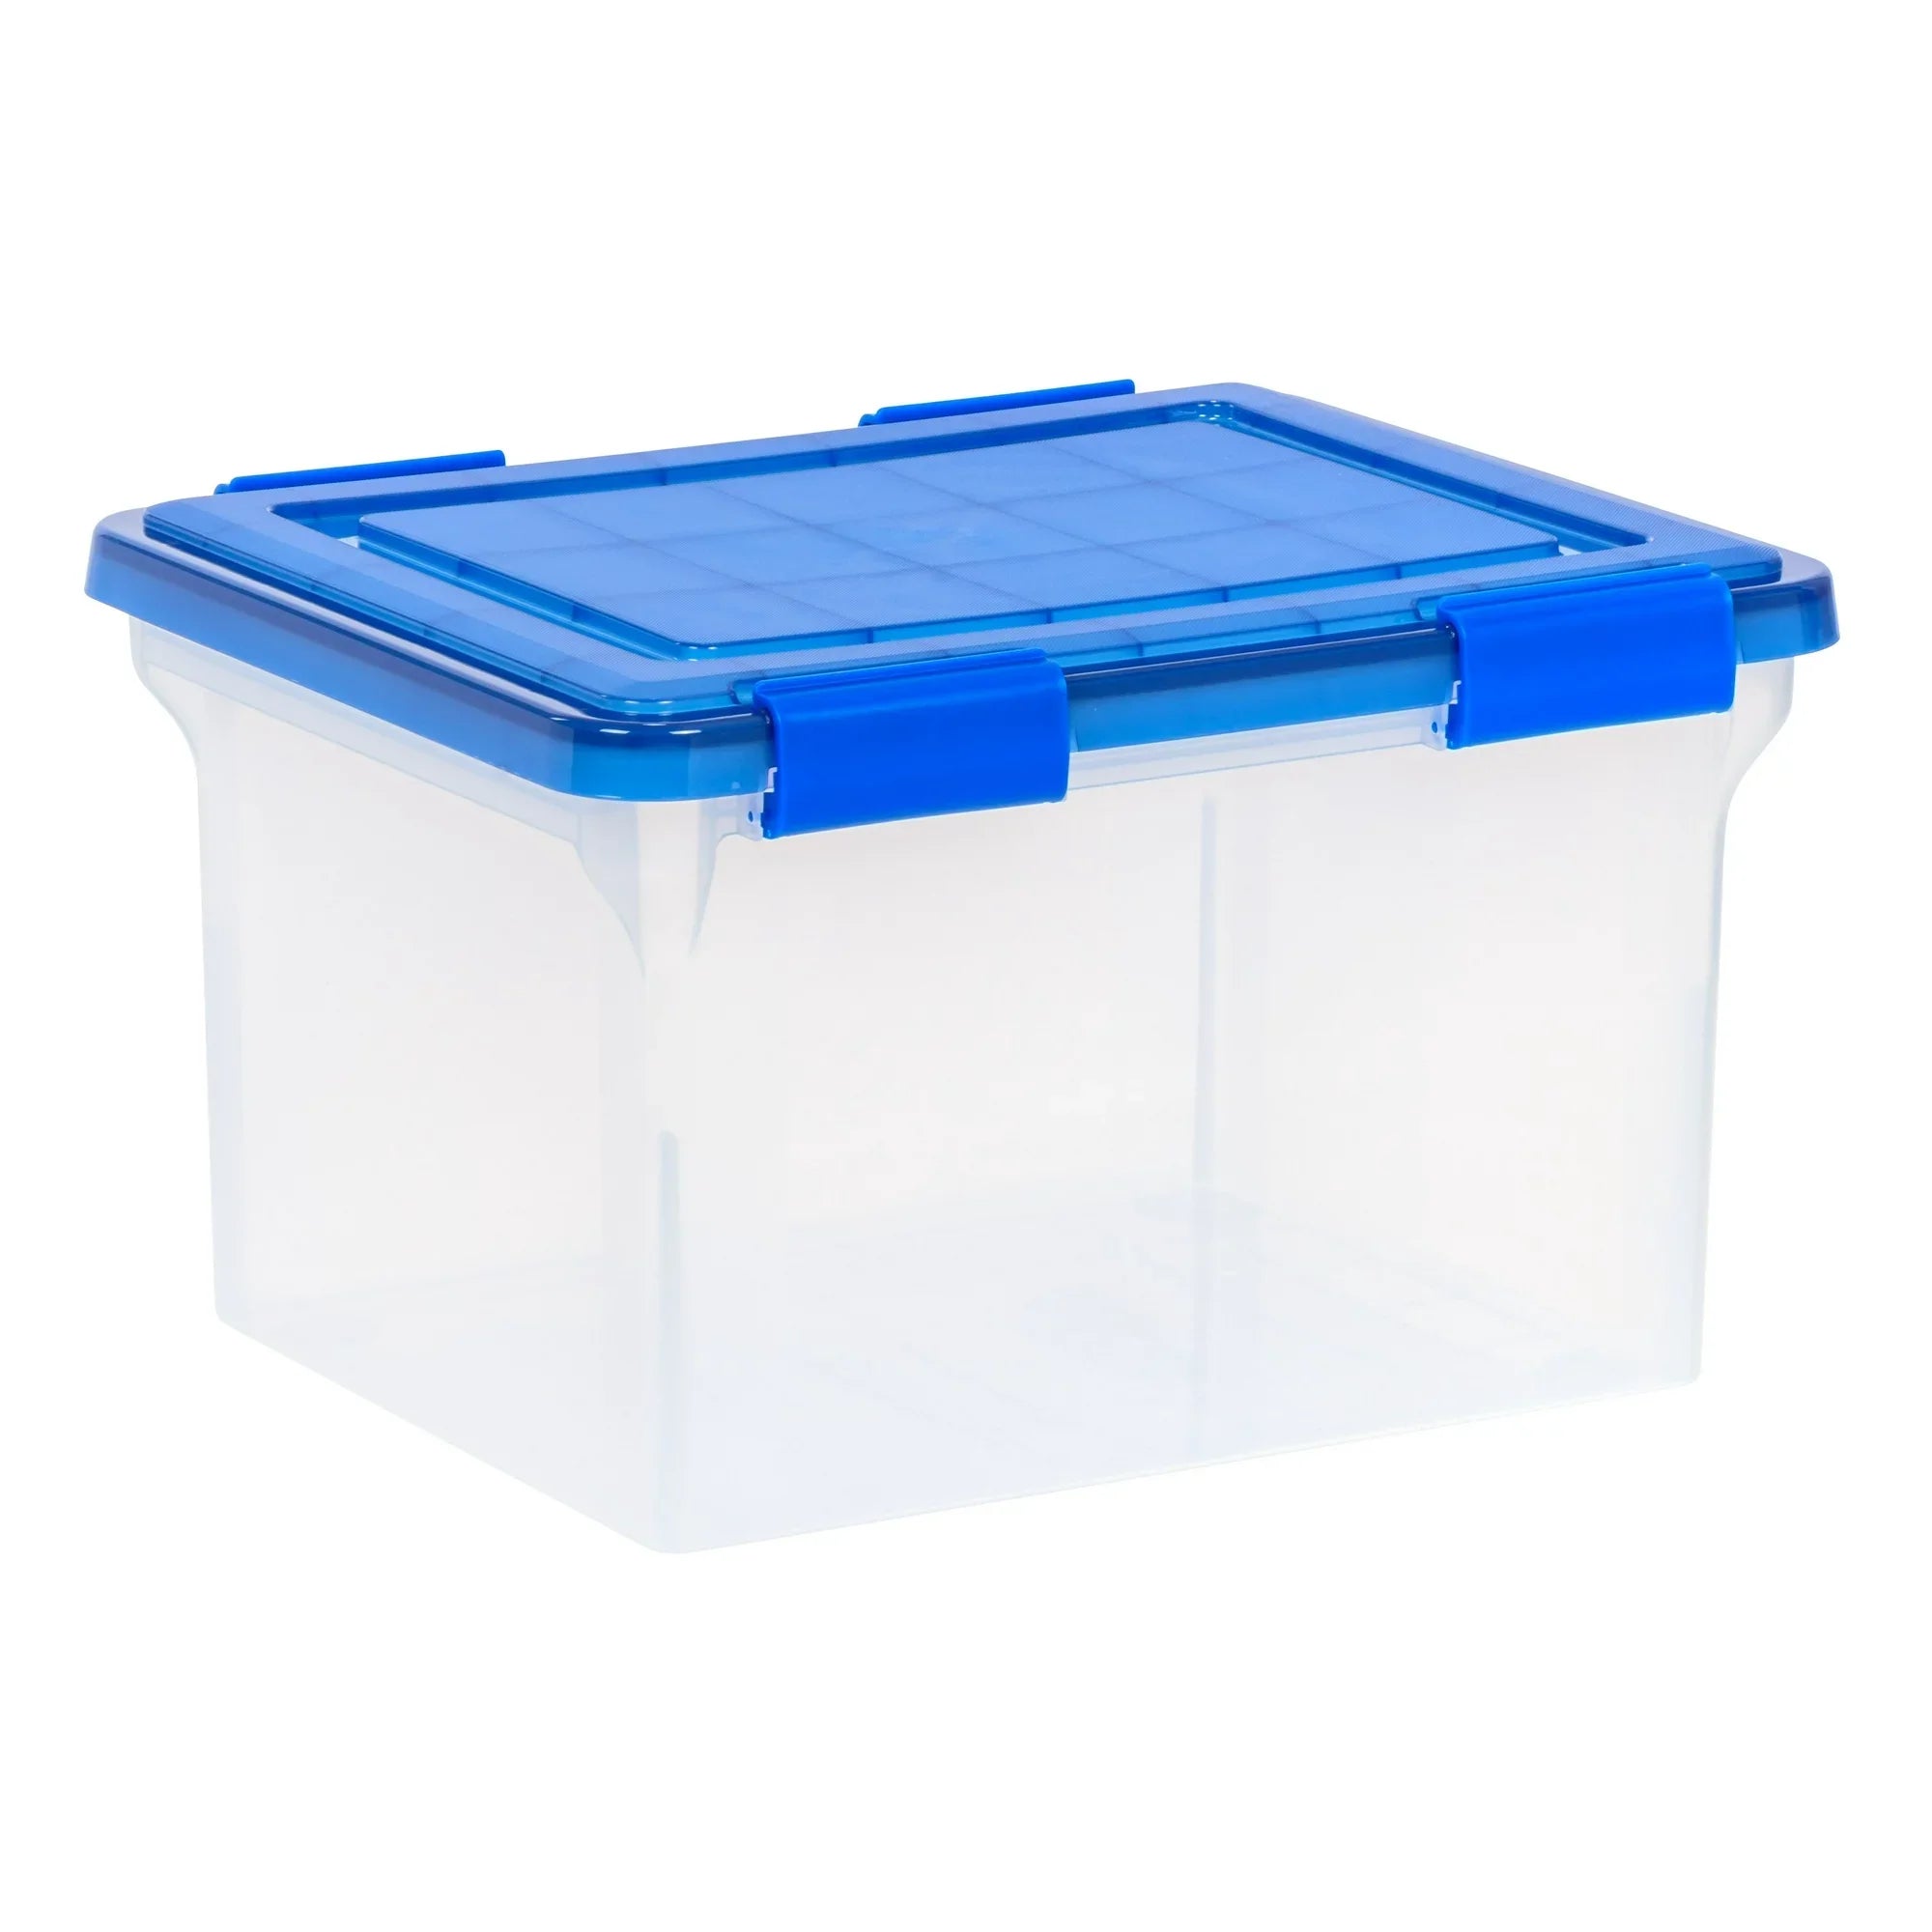 Wholesale prices with free shipping all over United States IRIS USA Letter and Legal Size Plastic File Storage Box with WeatherPro™ Gasket Lid, Blue - Steven Deals